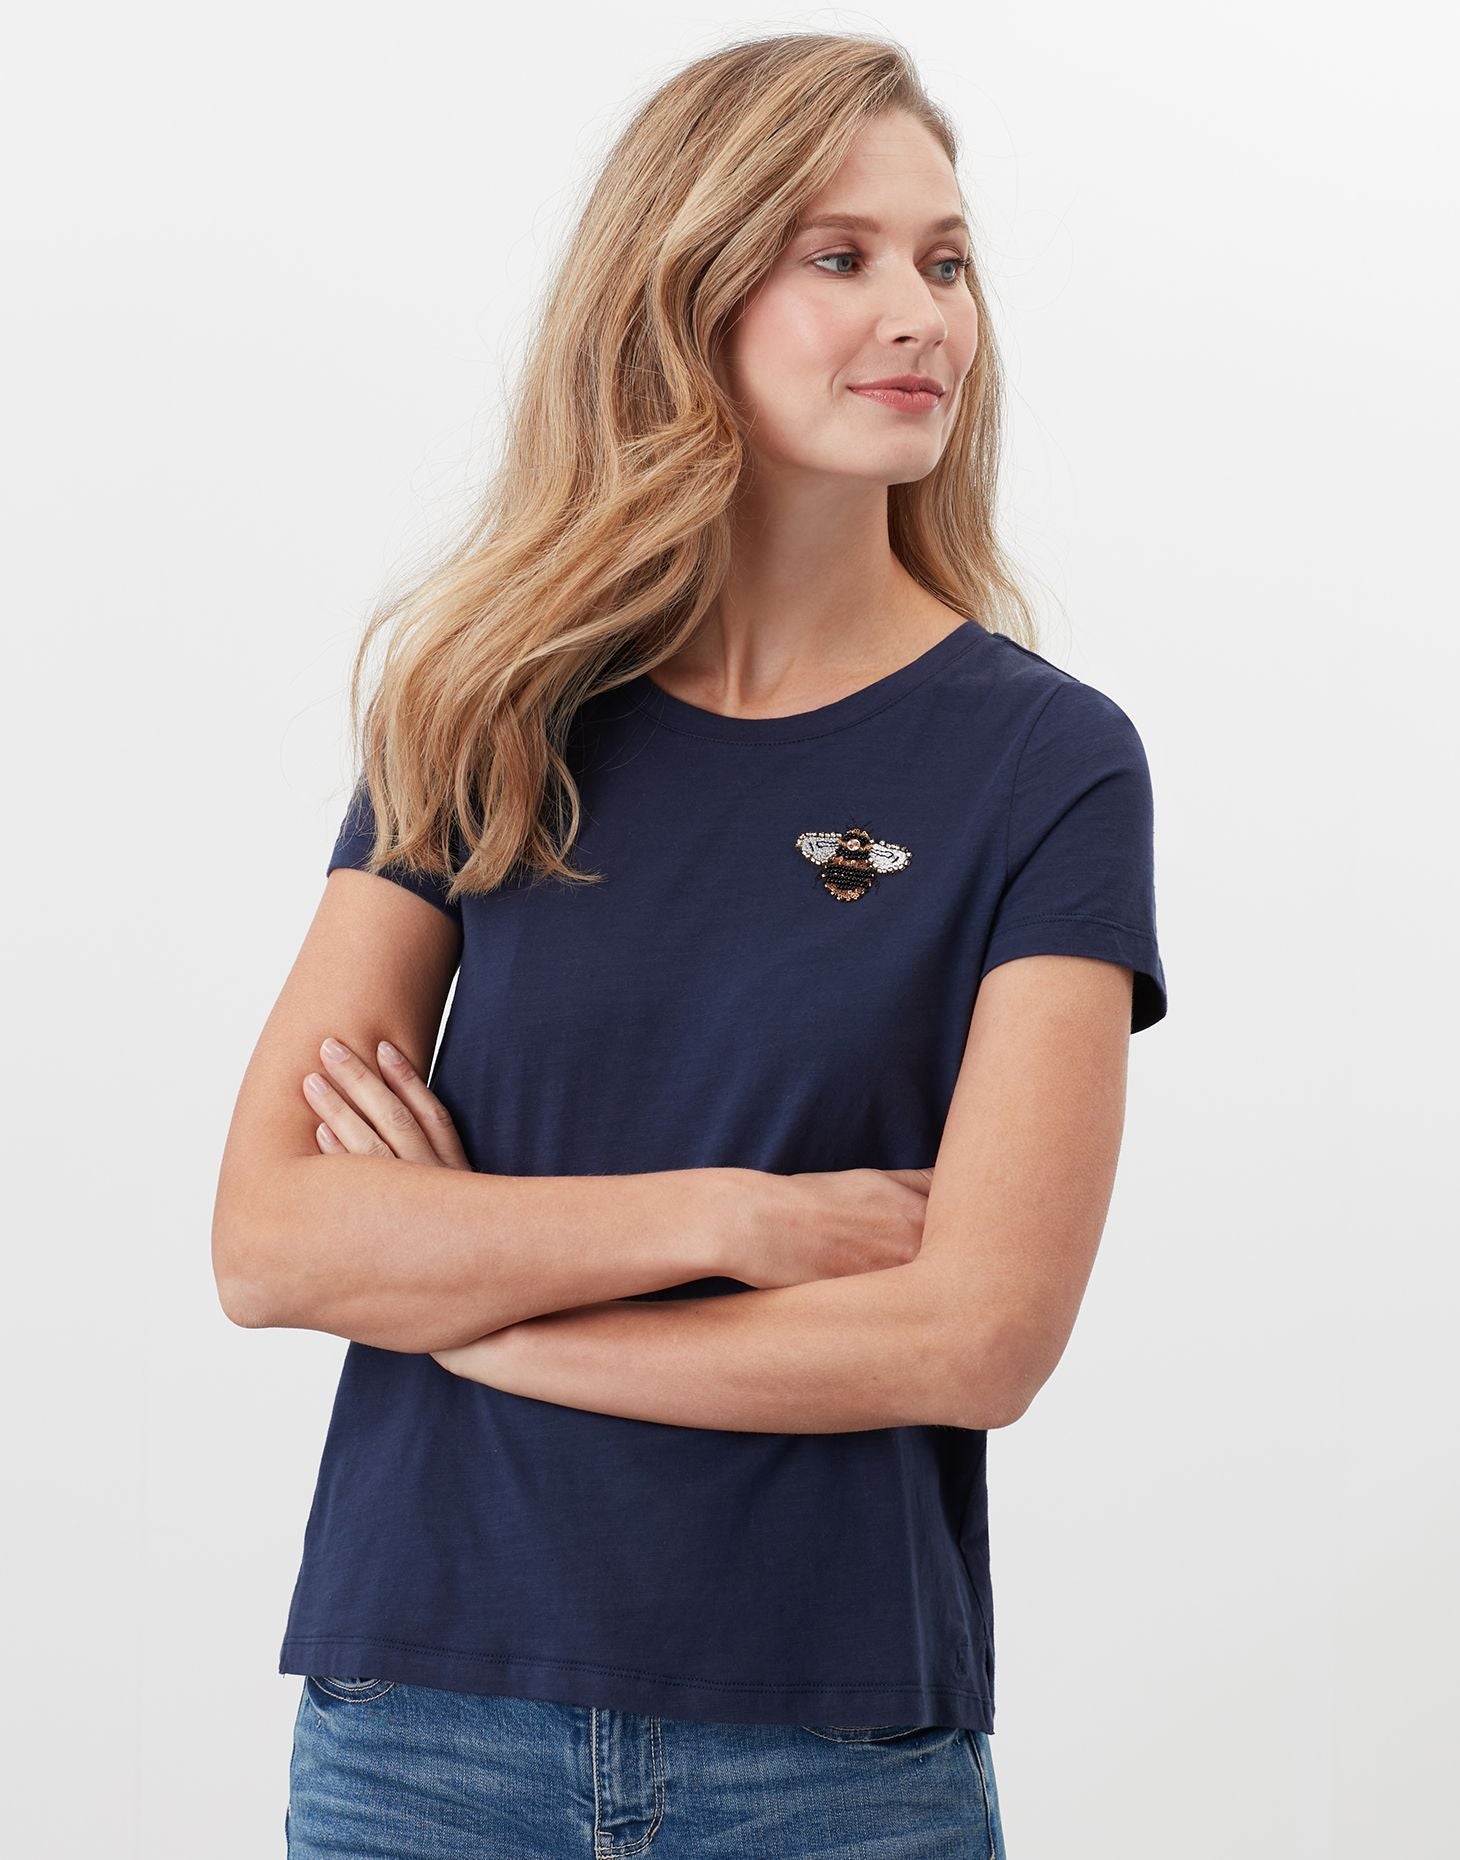 Joules - Women's Carley Embroidered Classic Crew T-Shirt - French Navy